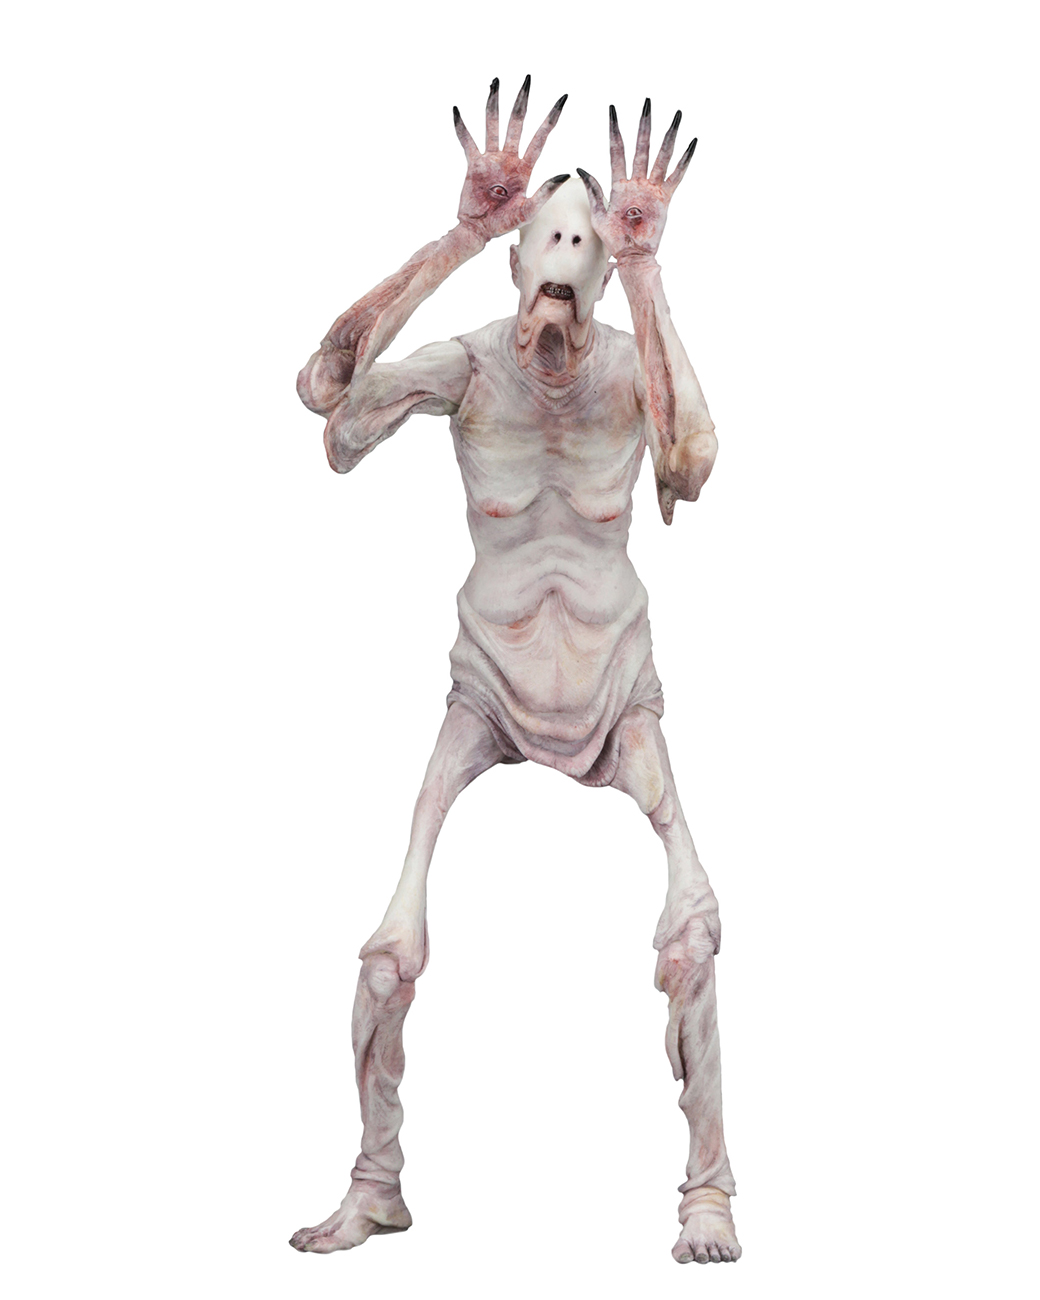 Pale Man NECA Pan’s Labyrinth 7” Scale Action Figure Guillermo Del Toro 